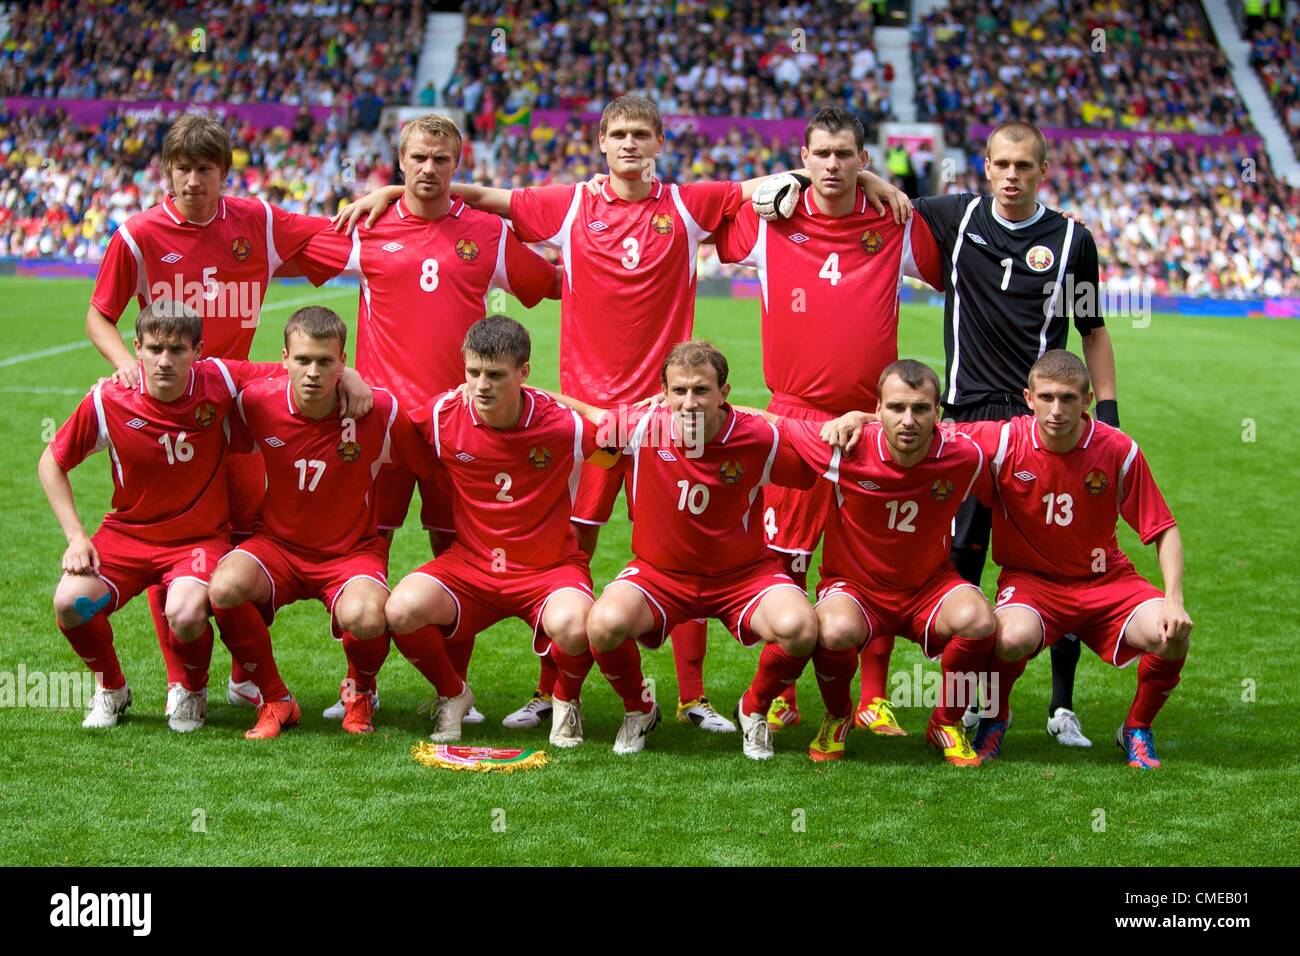 29.07.2012 Manchester, England. The Belarus Team for the first round group C match between Brazil and Belarus. 2012 Olympic Games mens football tournament. Stock Photo